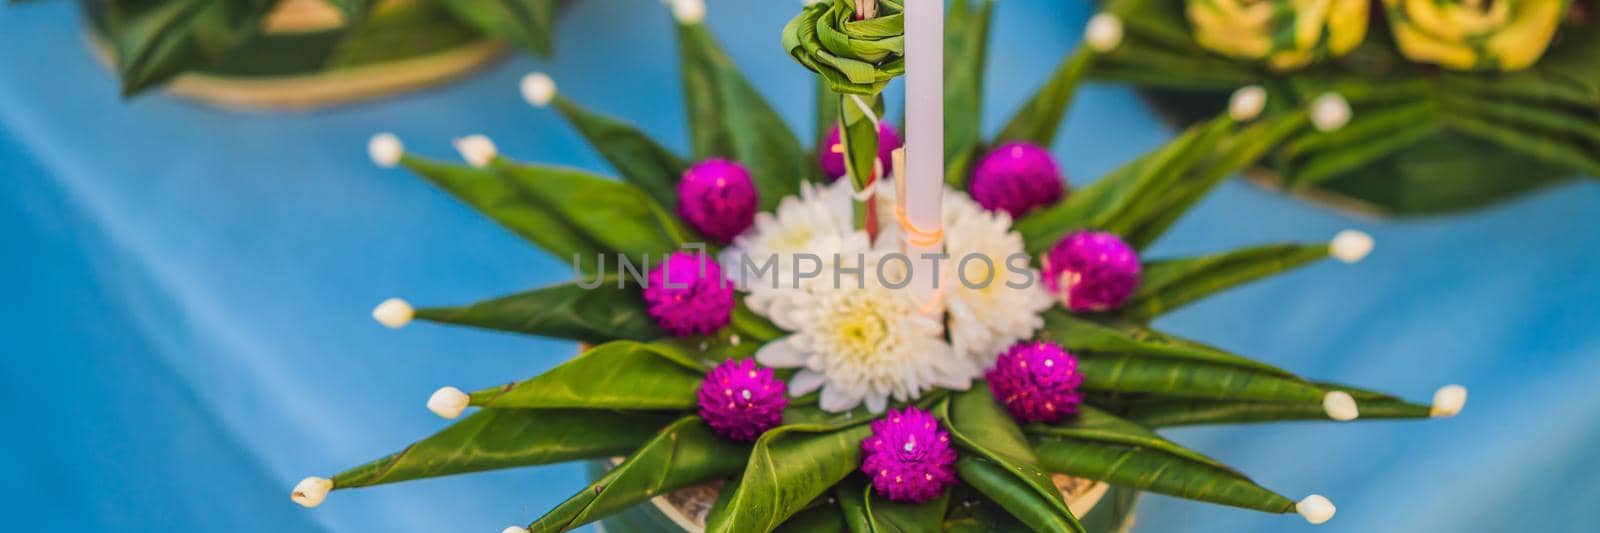 Loy Krathong festival, People buy flowers and candle to light and float on water to celebrate the Loy Krathong festival in Thailand BANNER, LONG FORMAT by galitskaya